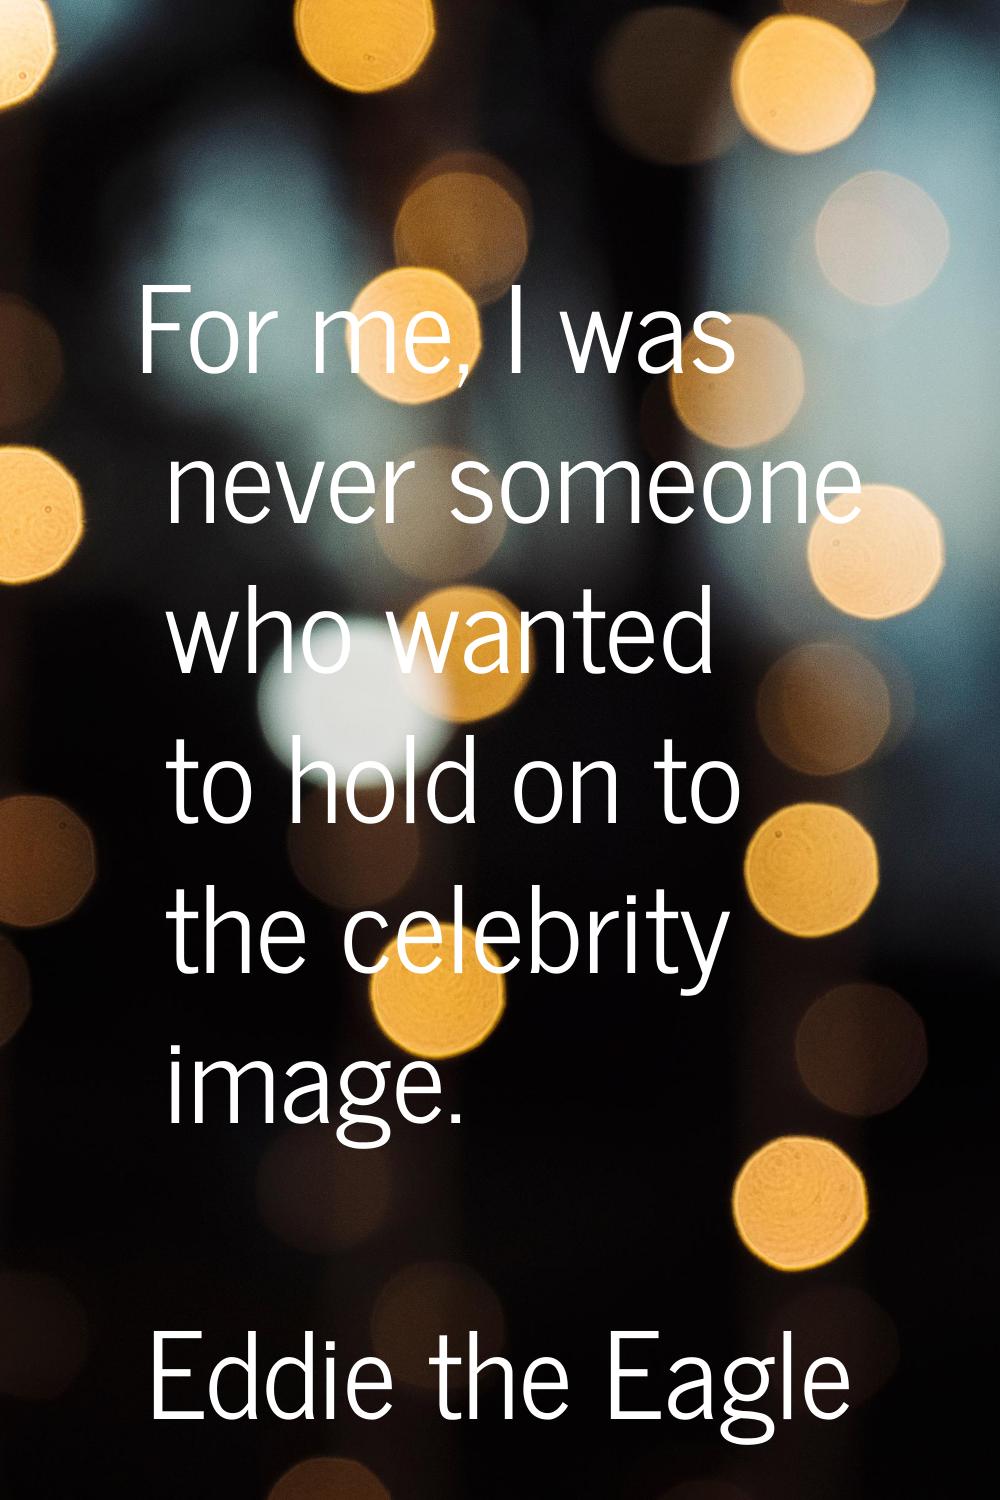 For me, I was never someone who wanted to hold on to the celebrity image.